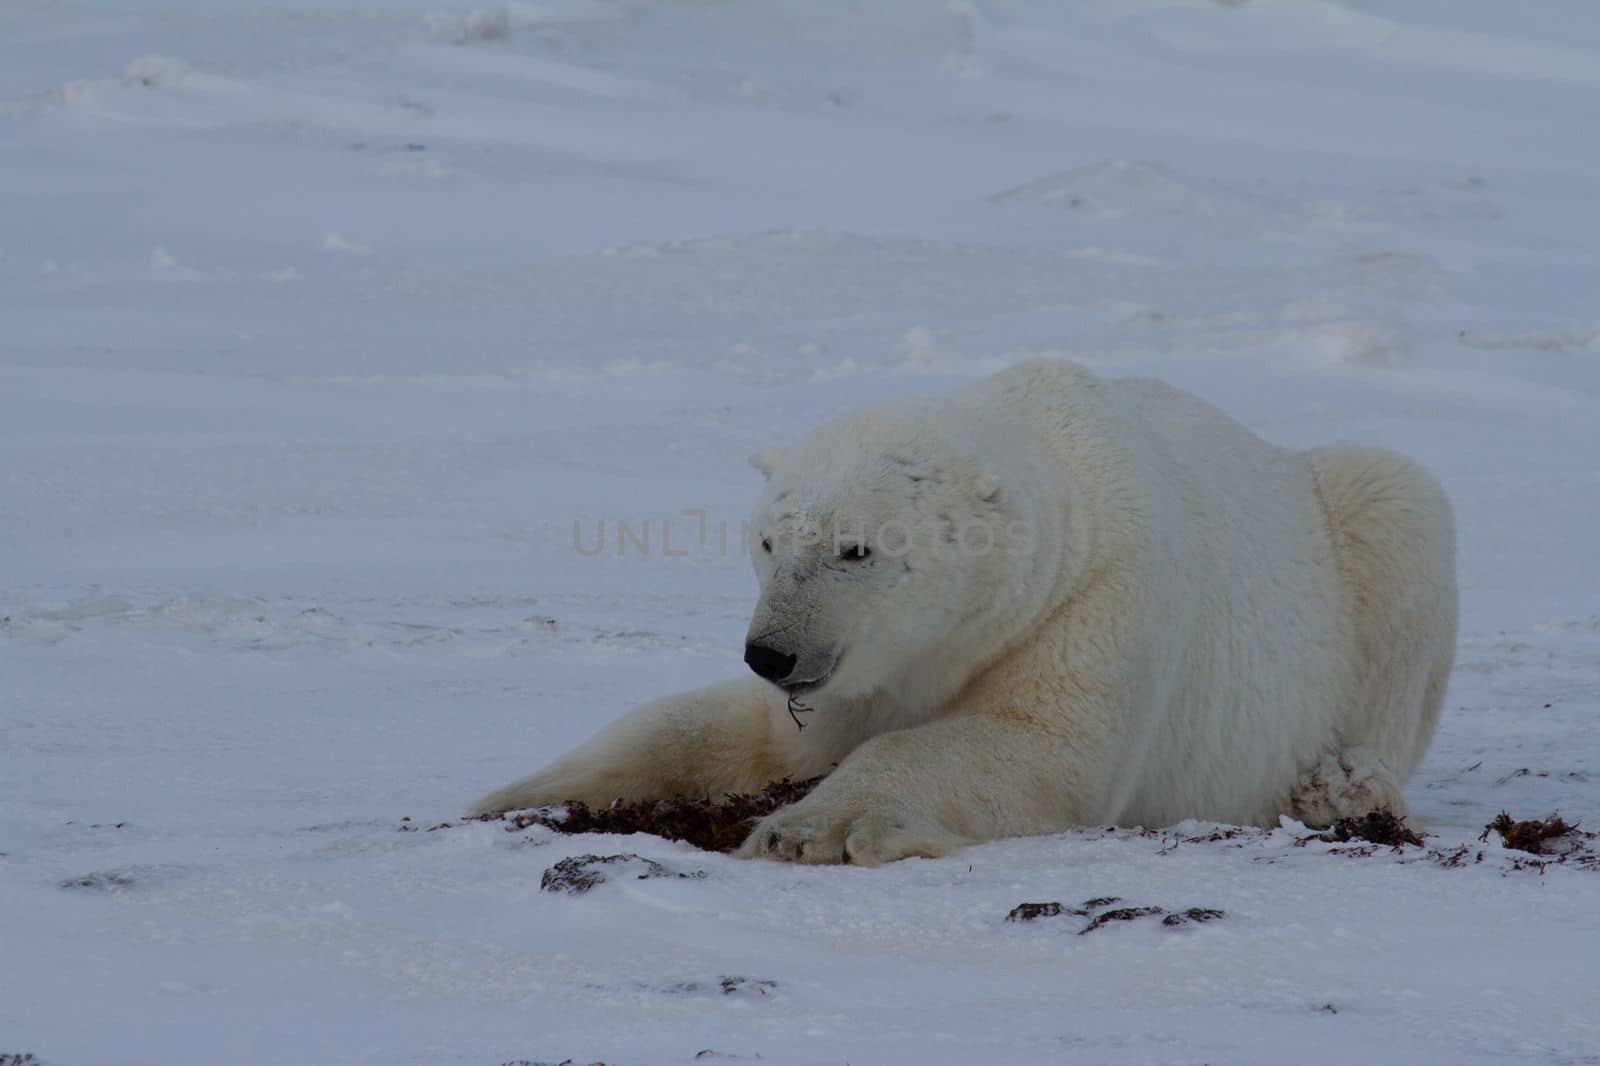 A polar bear or Ursus maritumus lying down with paws stretched out on snow by Granchinho